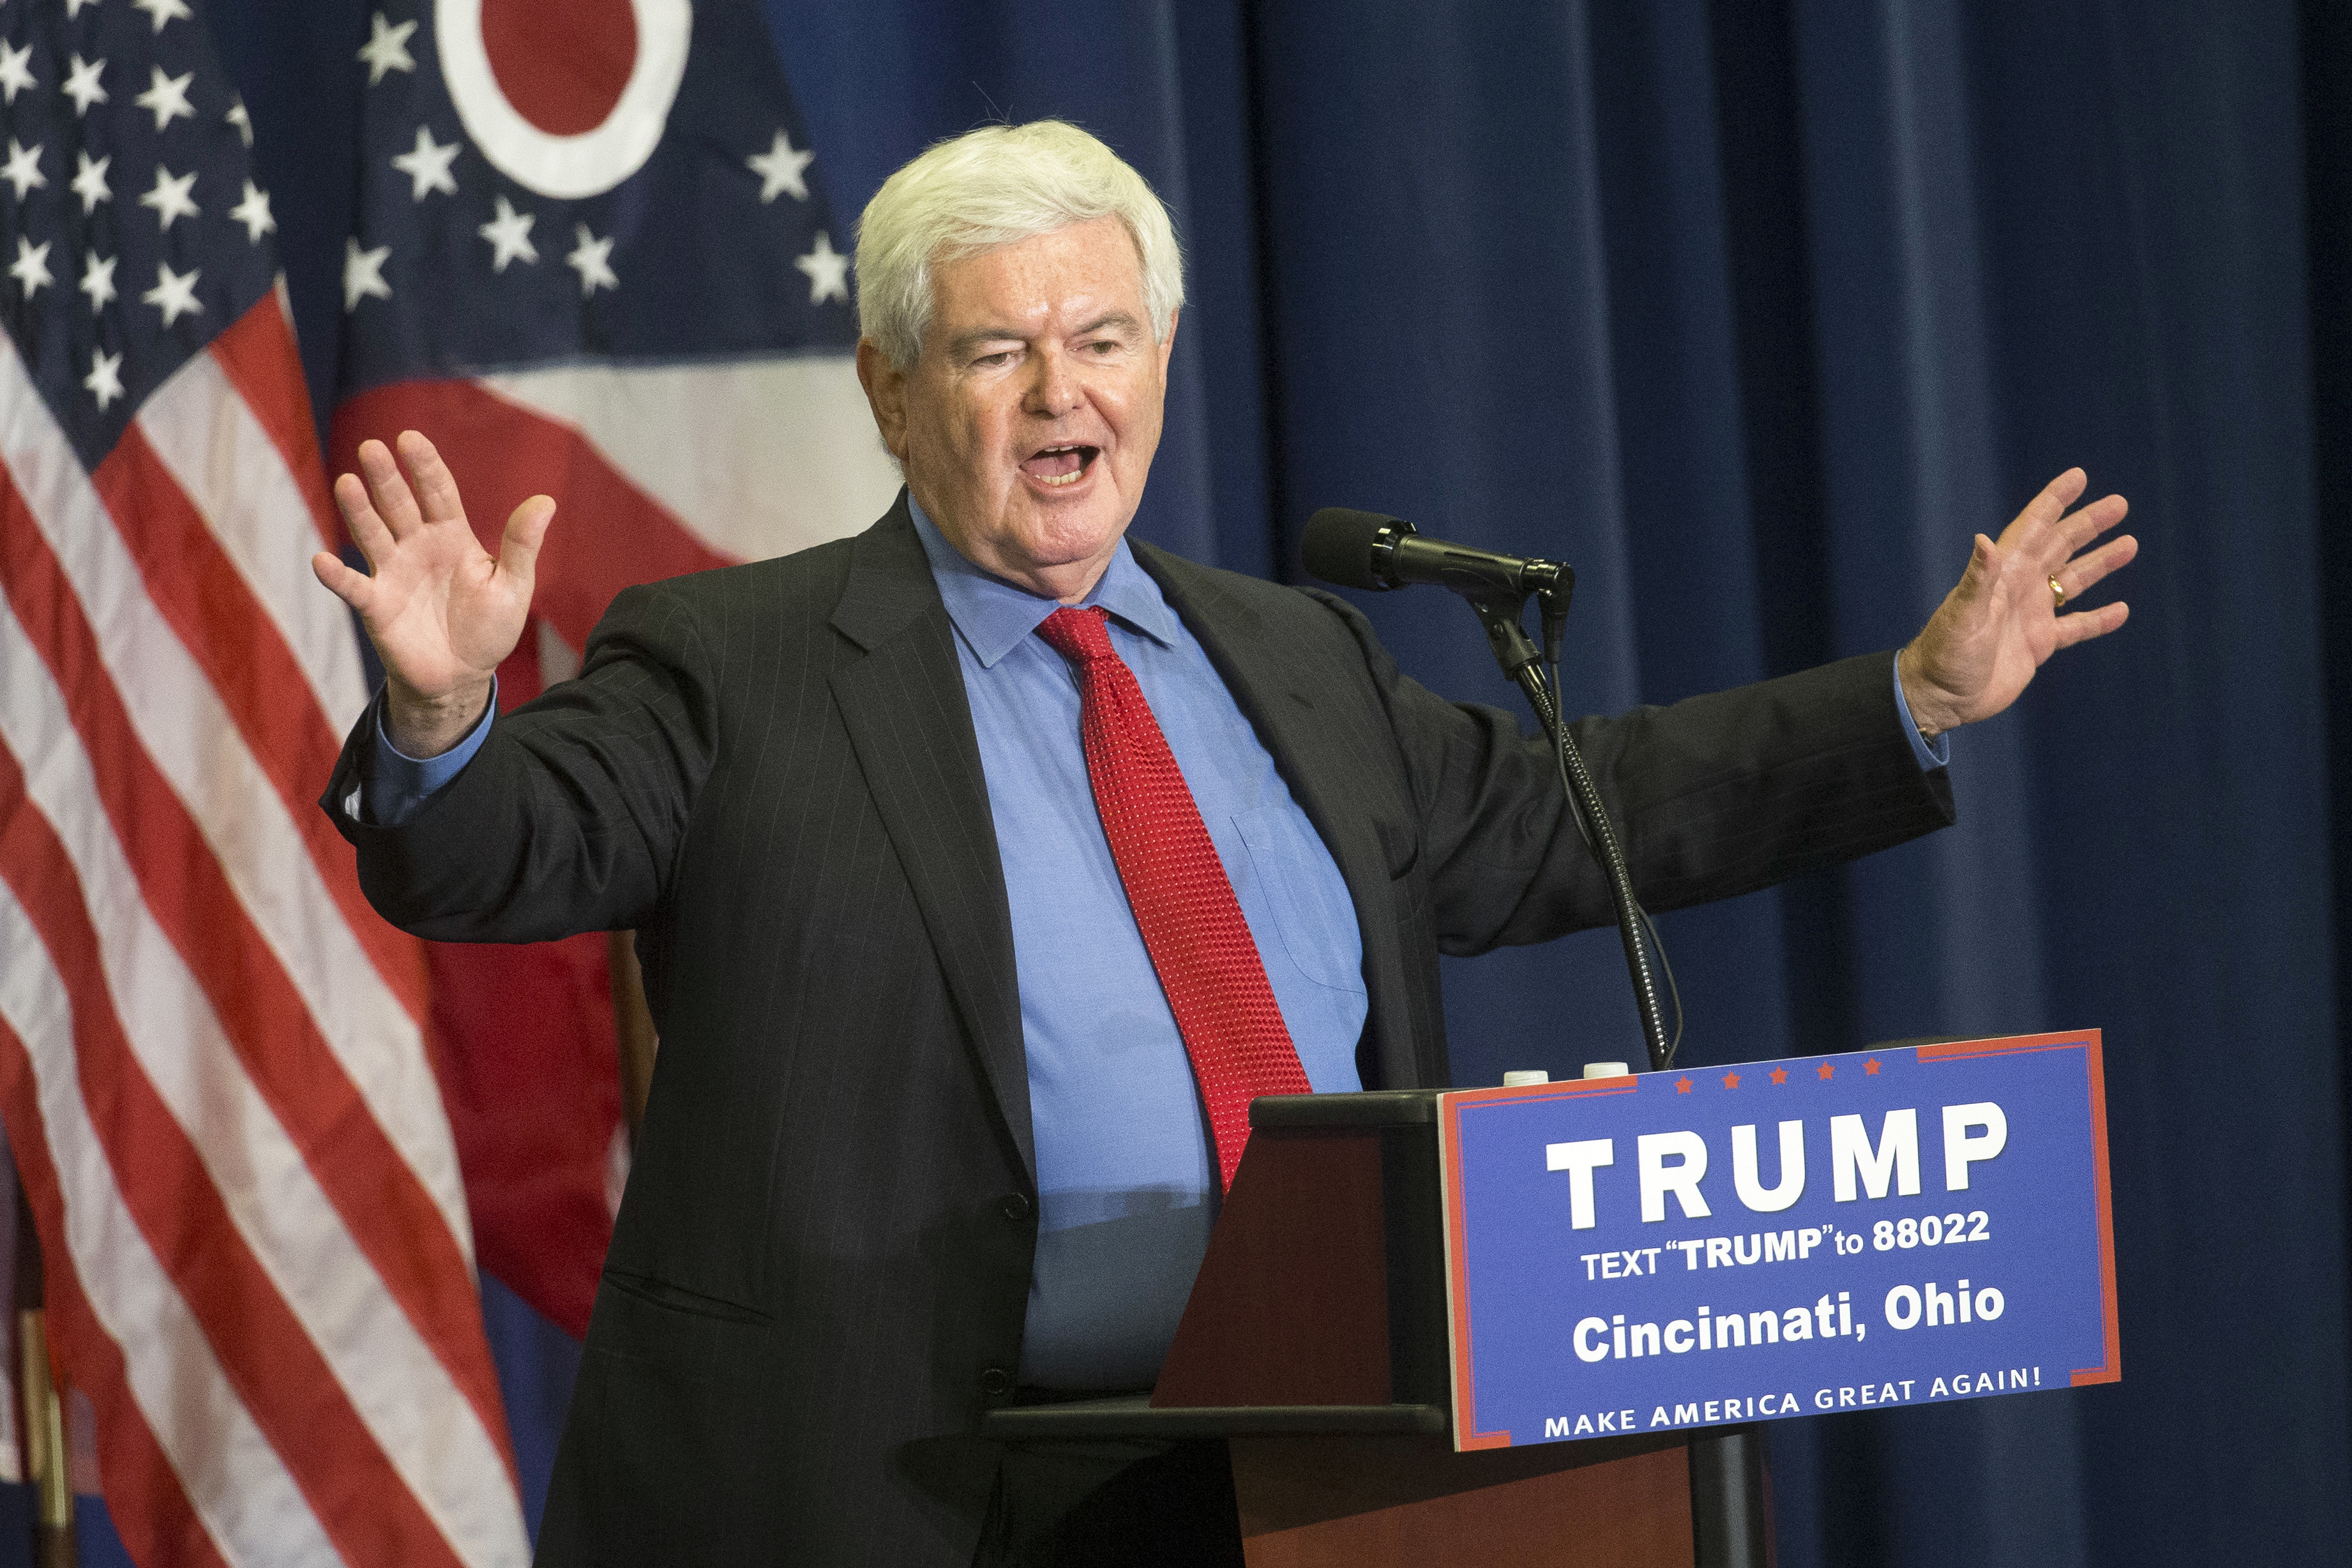 Former House Speaker Newt Gingrich speaks before introducing Republican presidential candidate Donald Trump during a campaign rally at the Sharonville Convention Center, Wednesday, July 6, 2016, in Cincinnati. (AP Photo/John Minchillo)